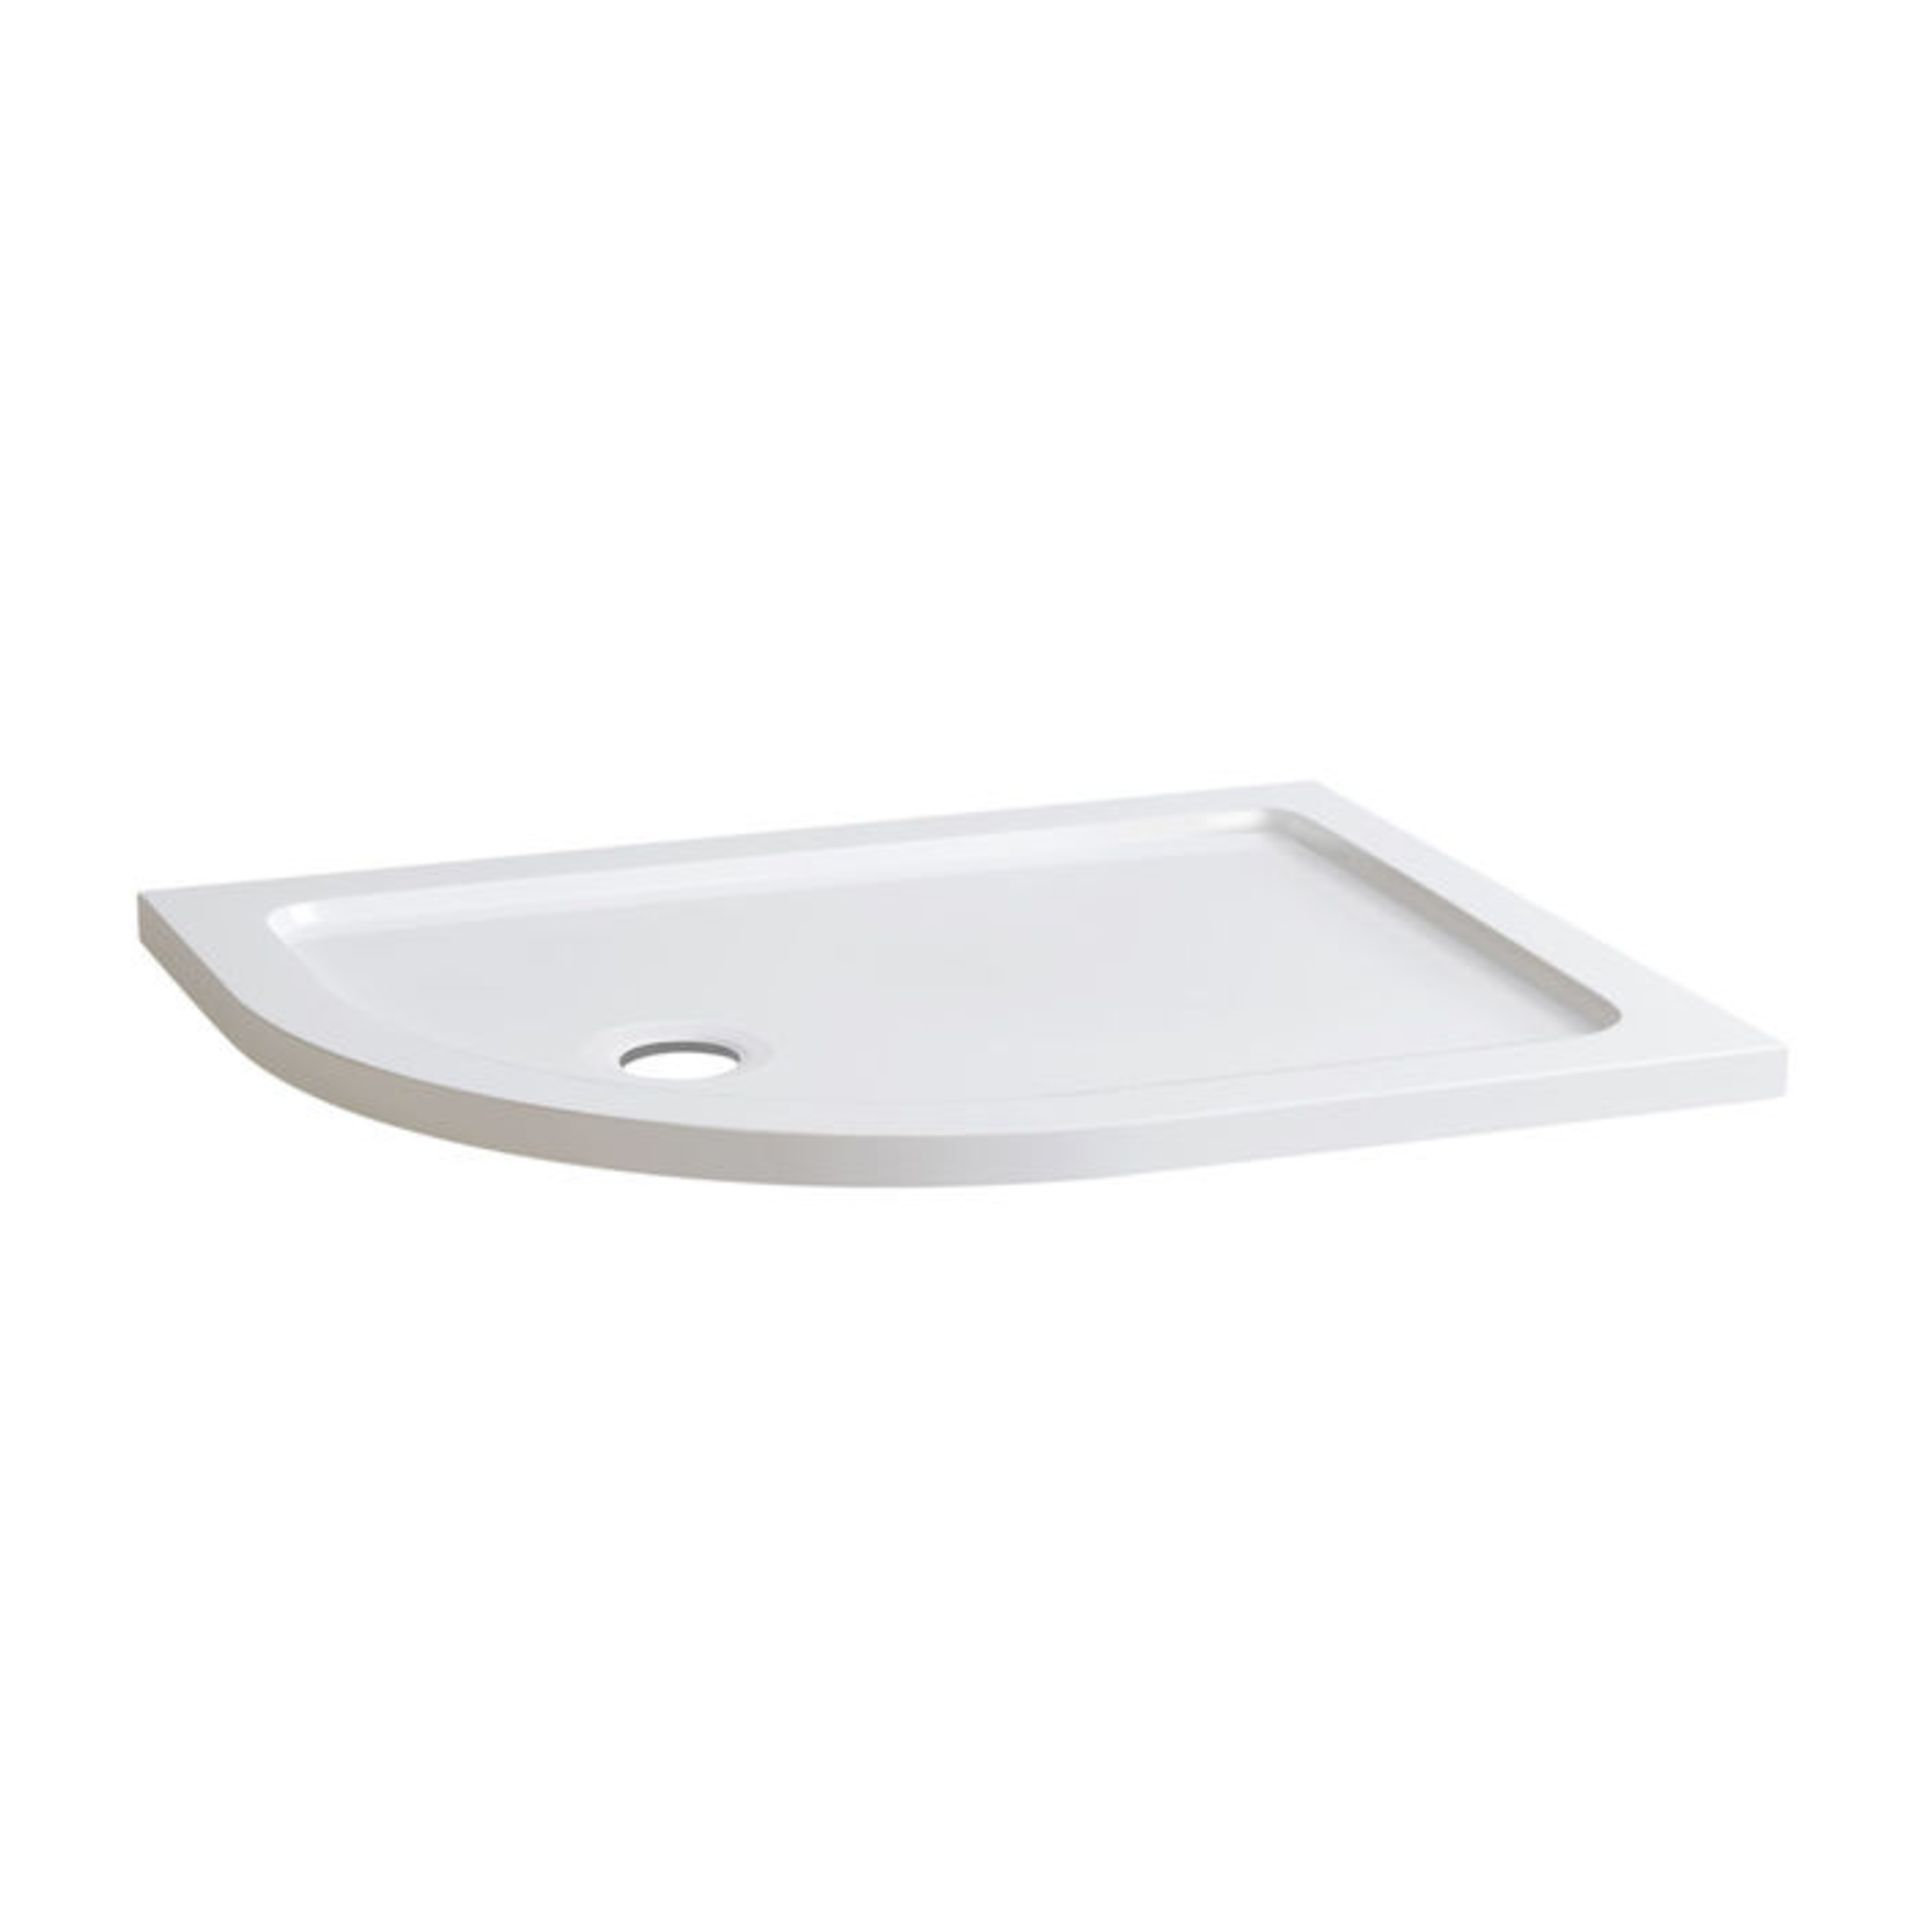 New (W108) 1000x800mm Offset Quadrant Ultra Slim Stone Shower Tray - Left. Low Profile, Ultr... - Image 2 of 2